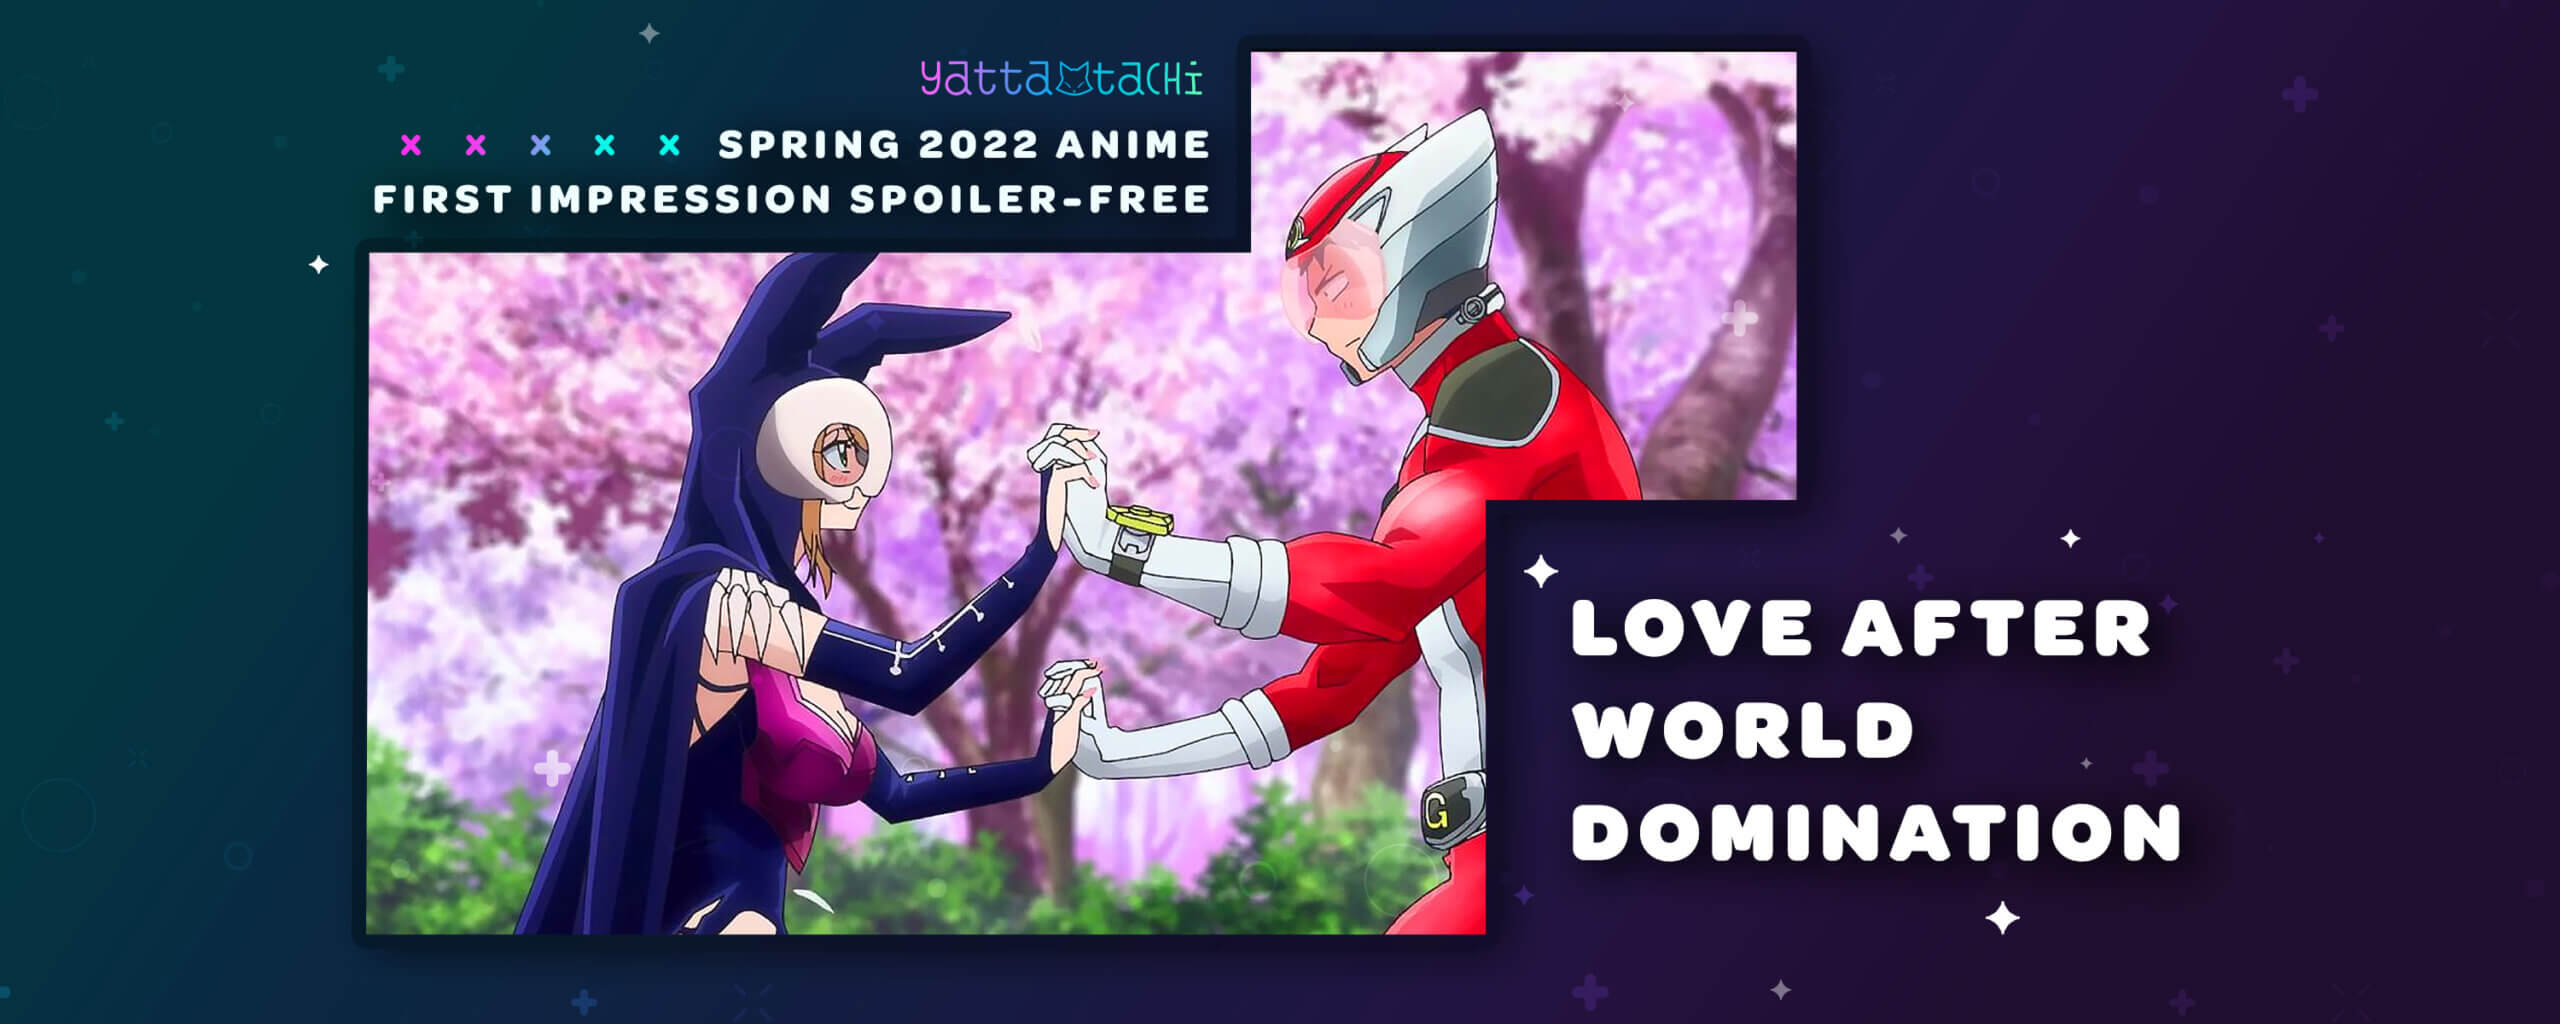 Love After World Domination Season 2: Confirmed Release Date, Did